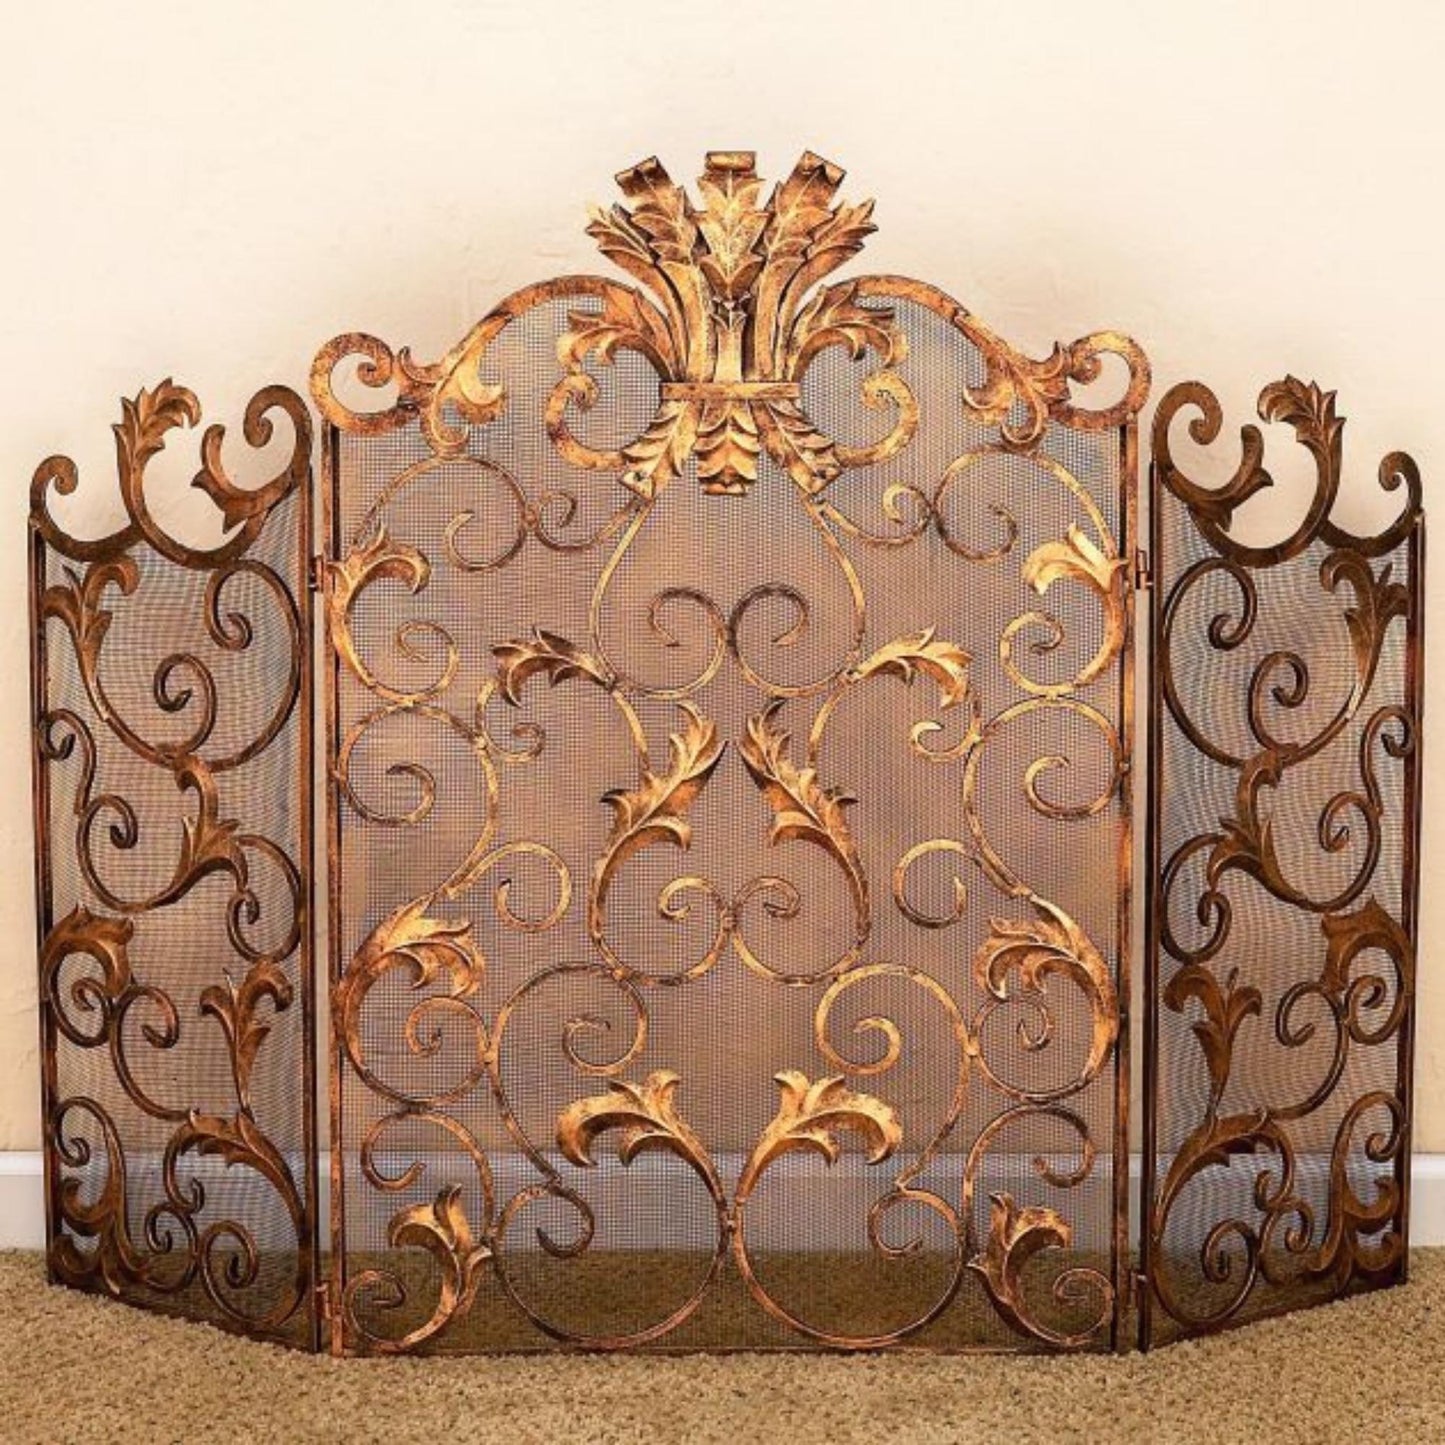 Antique Gold Acanthus Leaf Ornate Fire Screen - Three Panel Fireplace Screen | INSIDE OUT | InsideOutCatalog.com